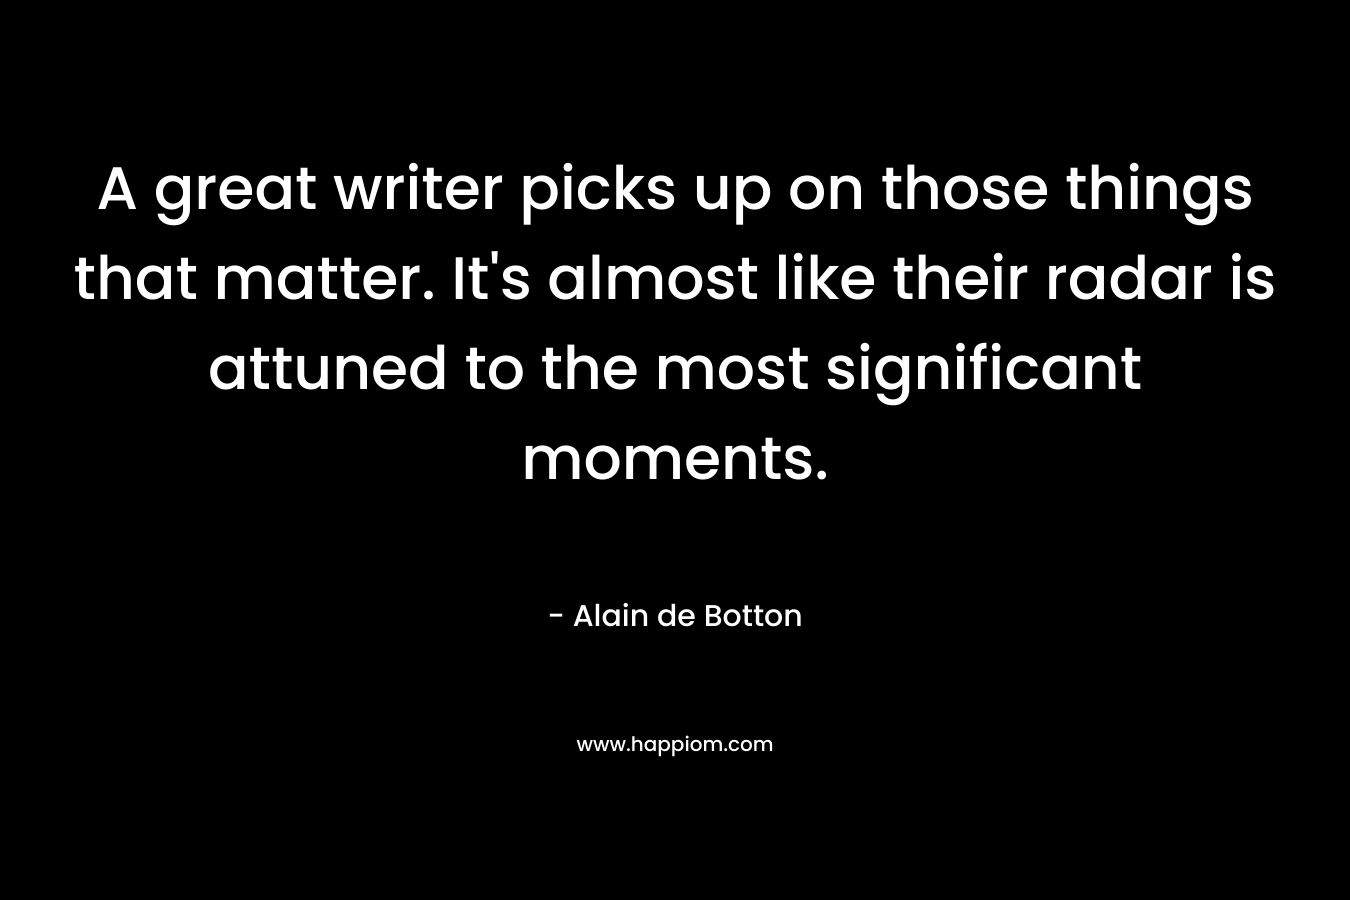 A great writer picks up on those things that matter. It's almost like their radar is attuned to the most significant moments.